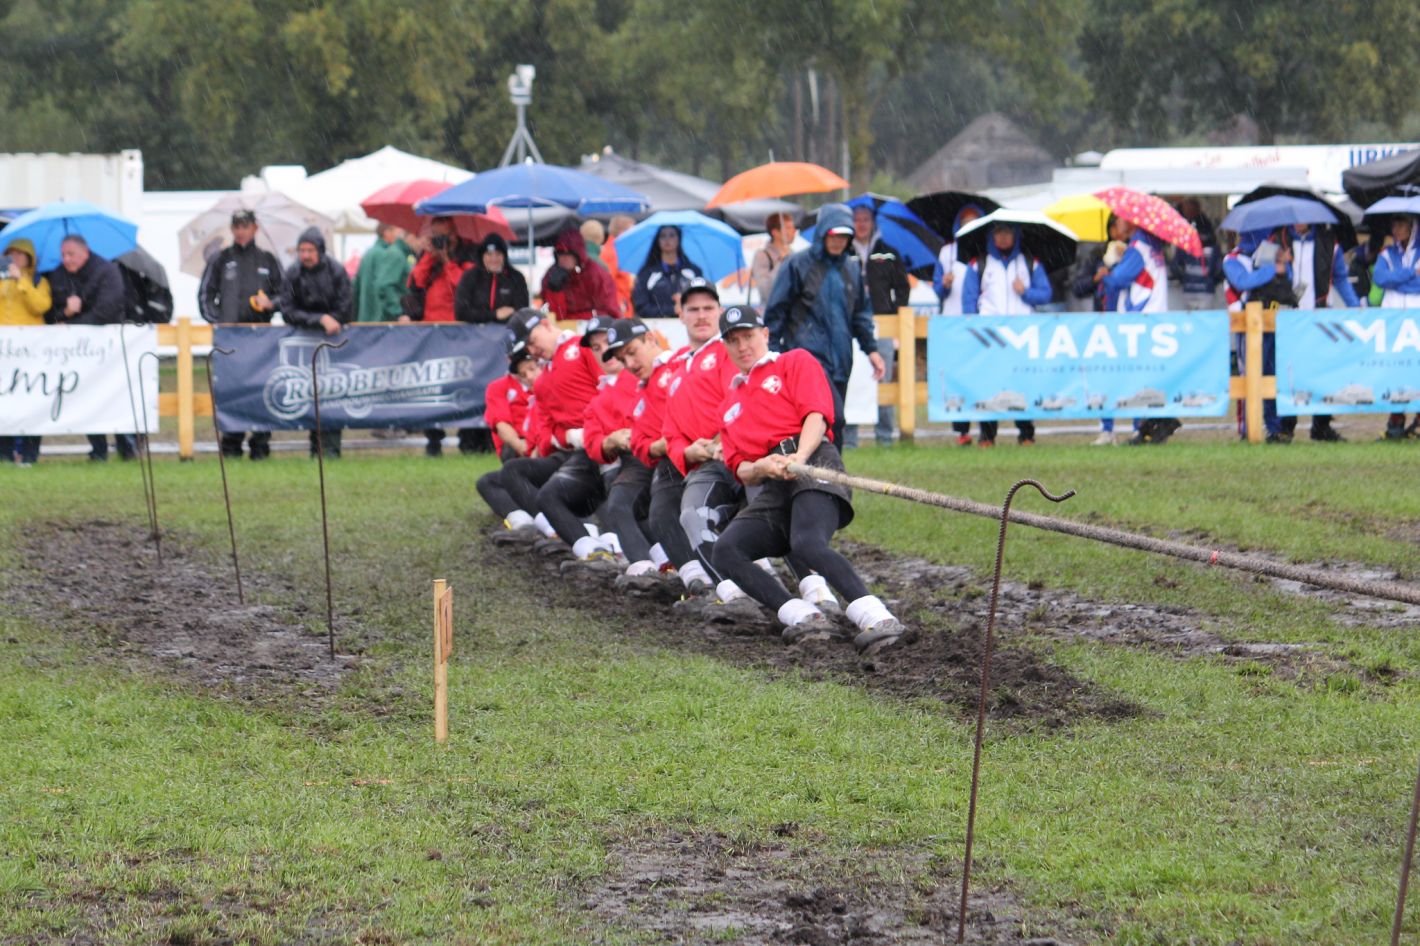 The Swiss team during the competition